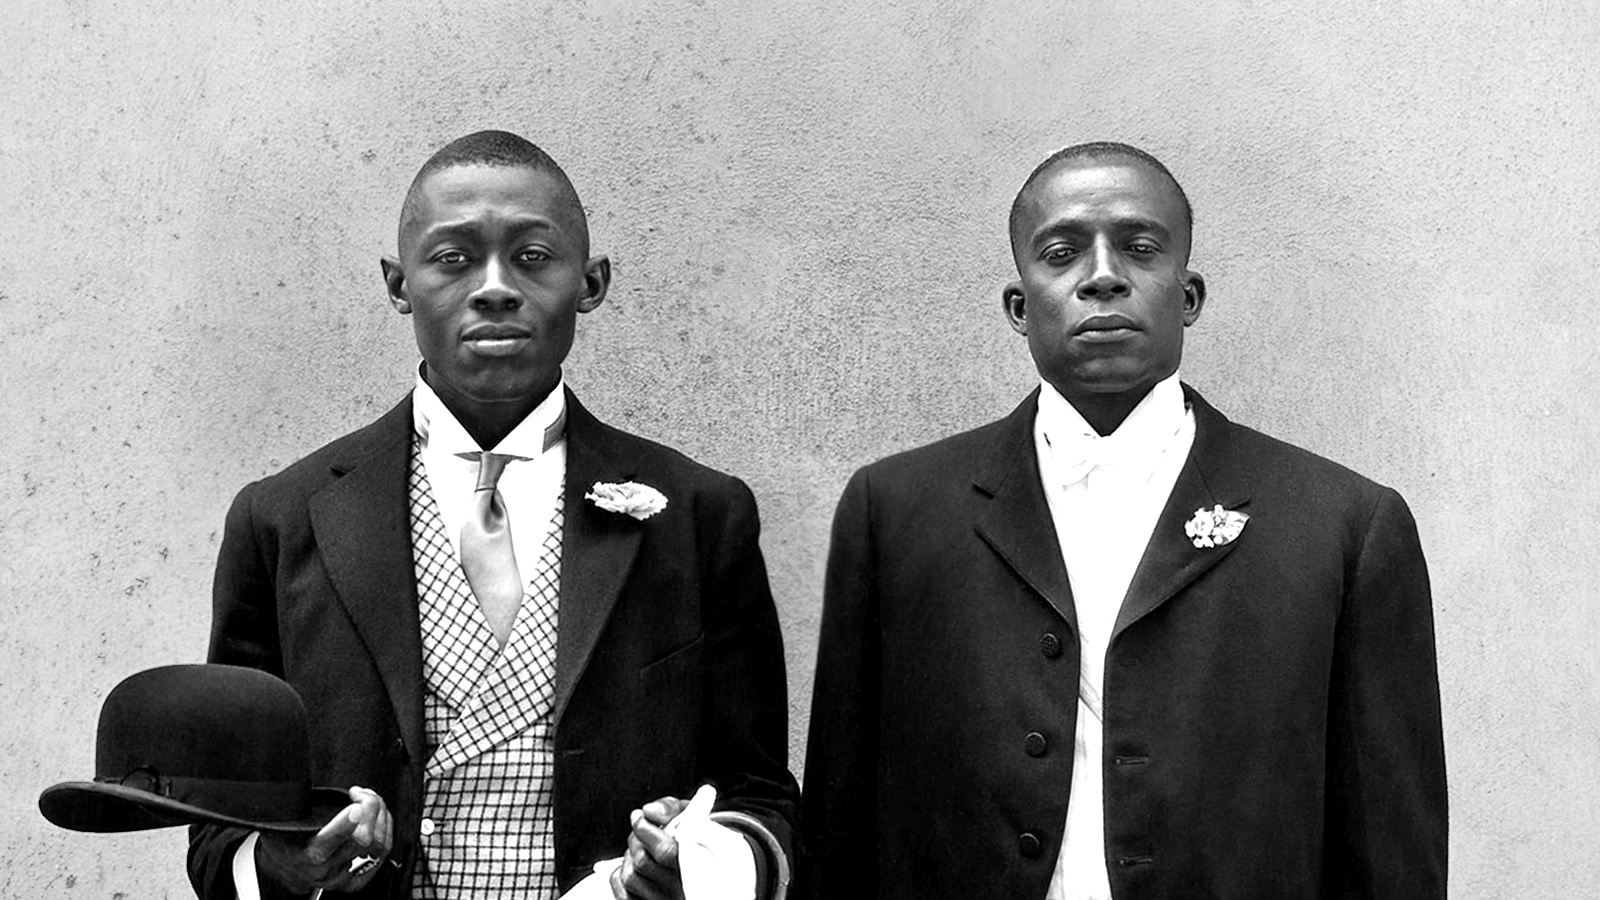 Two black men standing side-by-side in formal suits